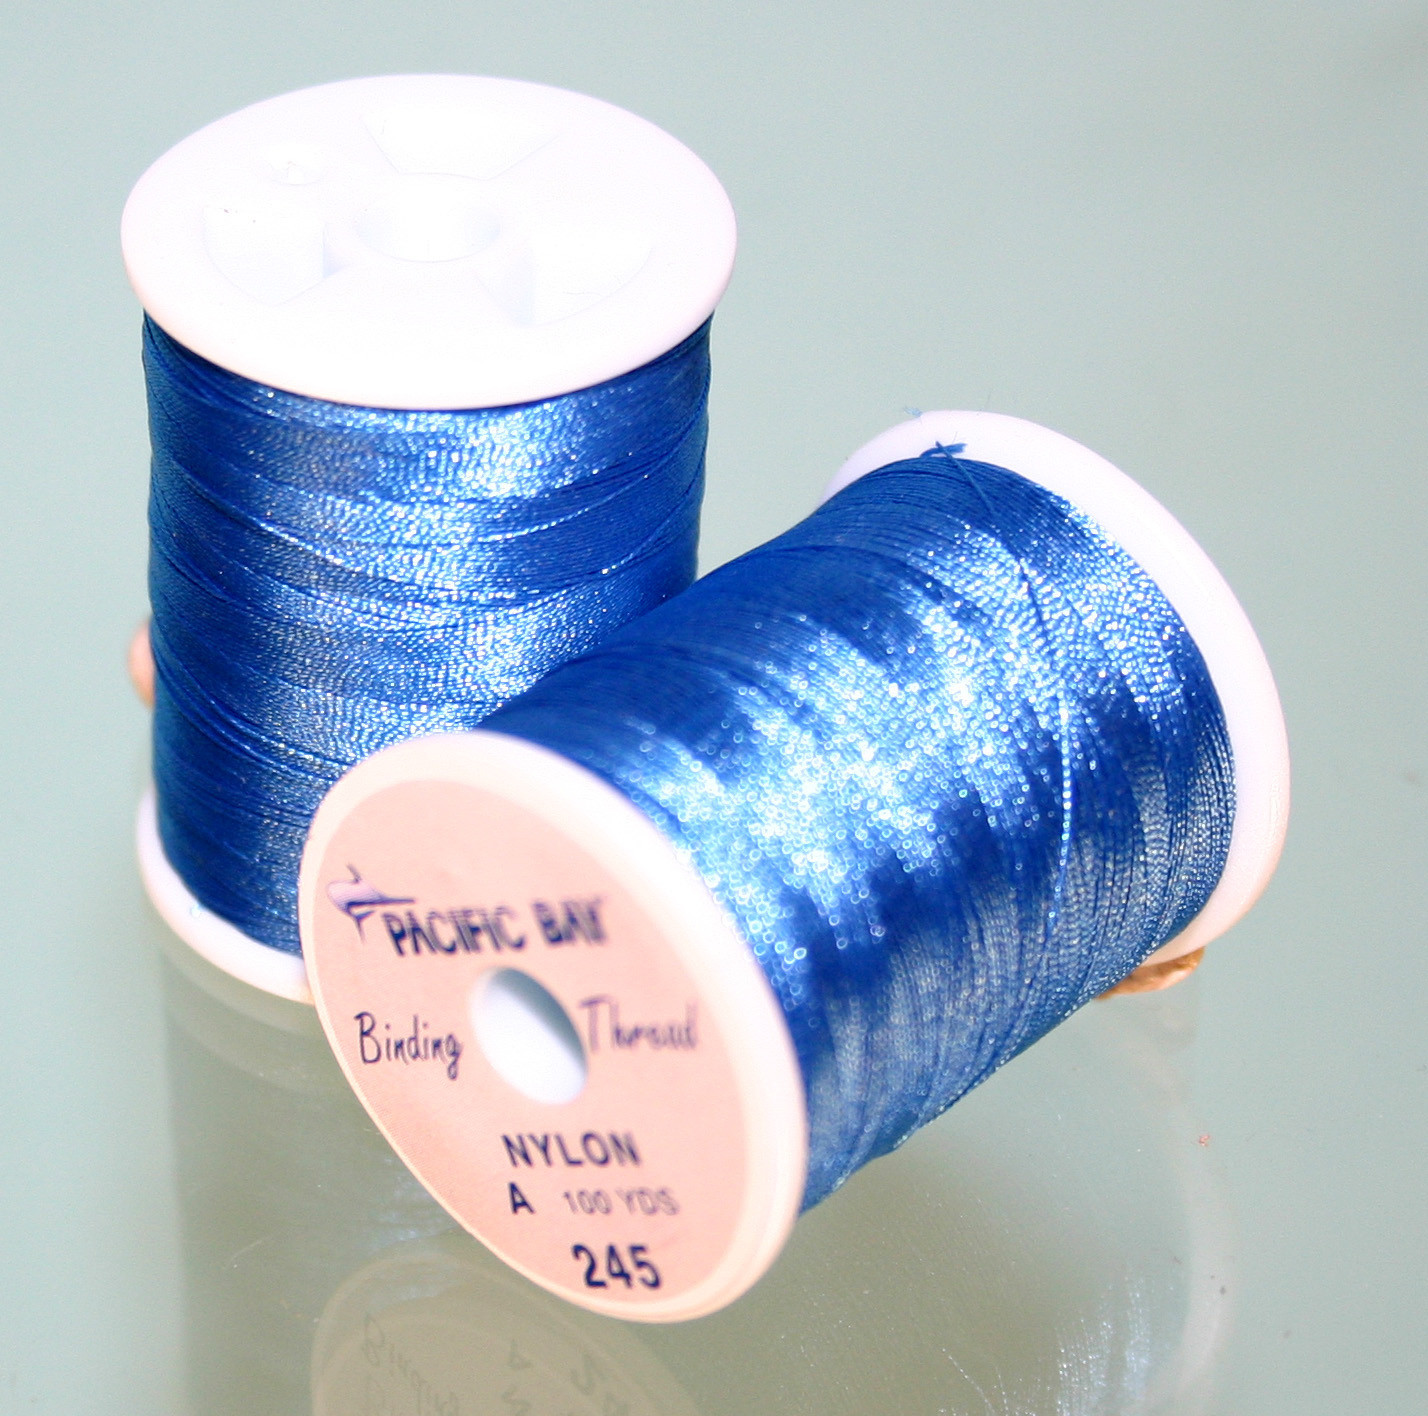 2 Spools PacBay Nylon Rod Building Thread-950 Yards Size A-Fishing-Pick Color 